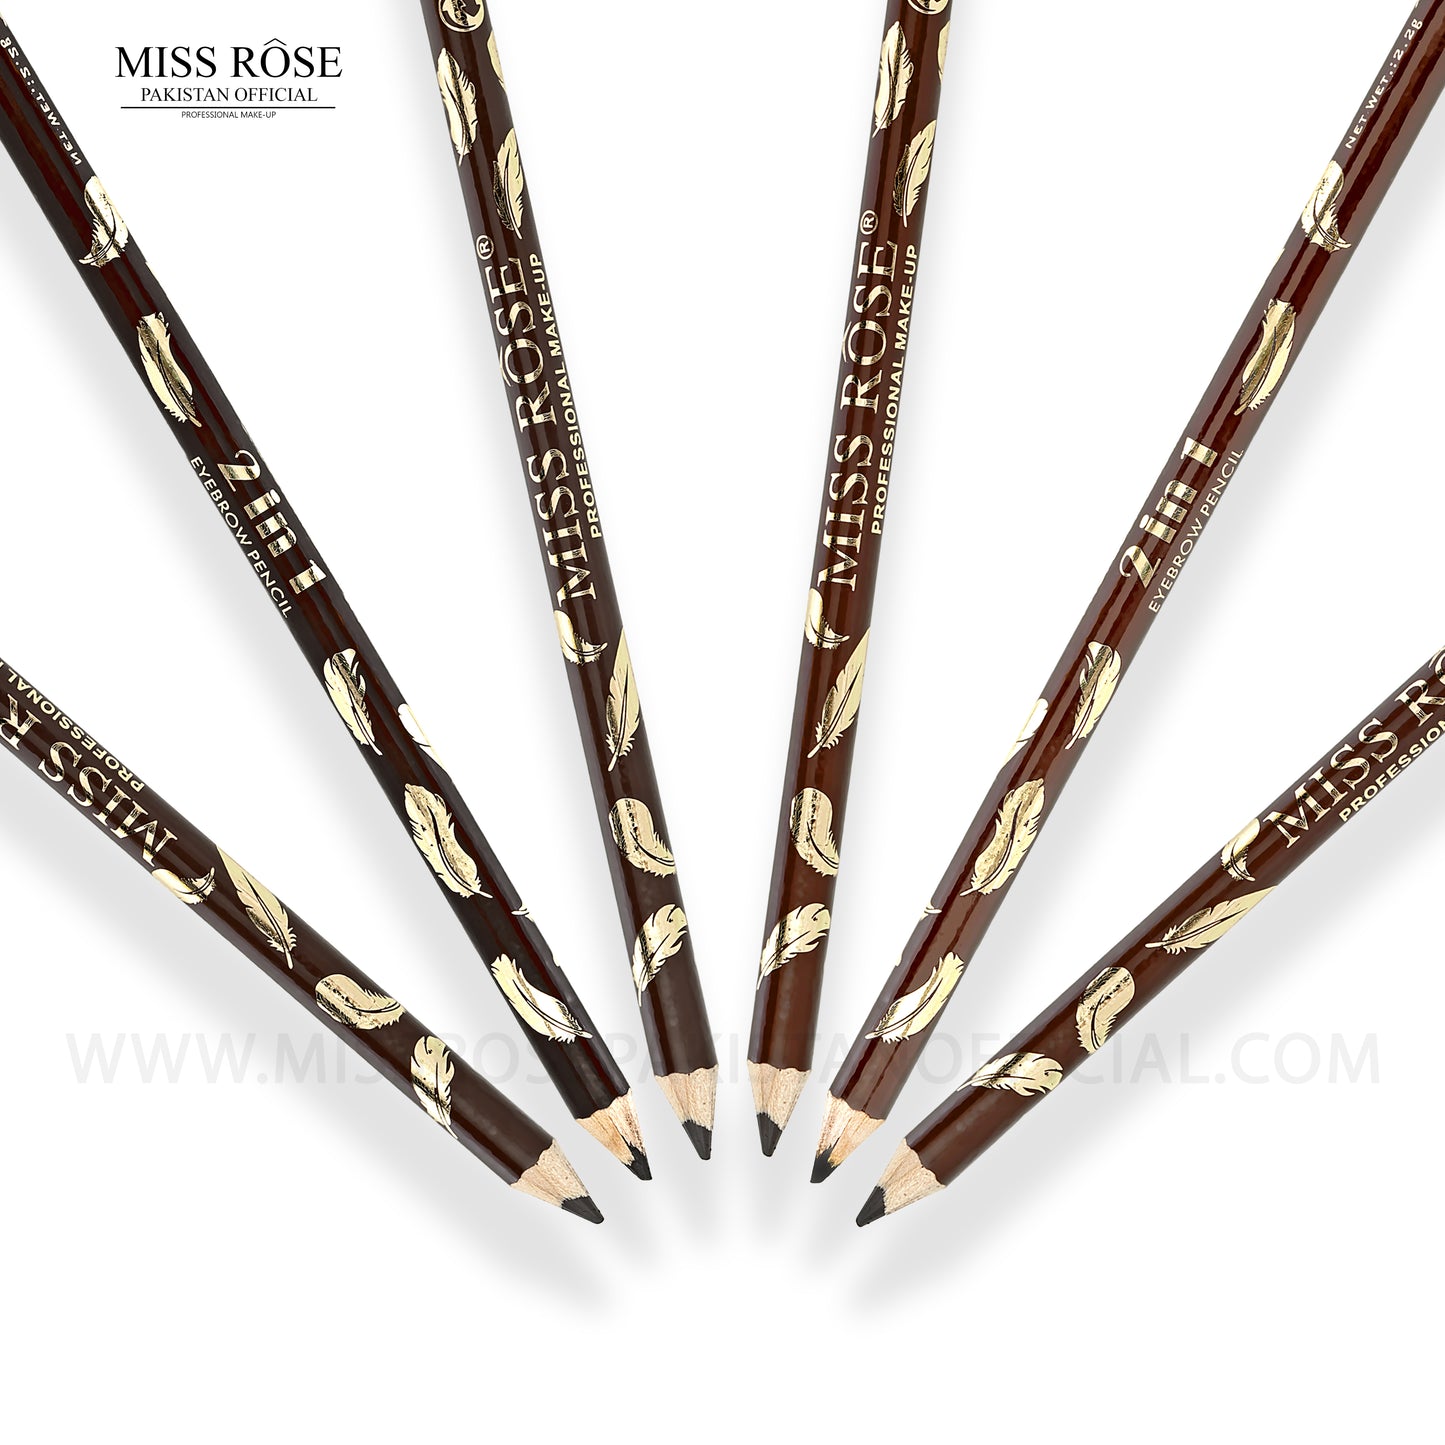 Miss Rose Eyebrow Pencil with Sharpner